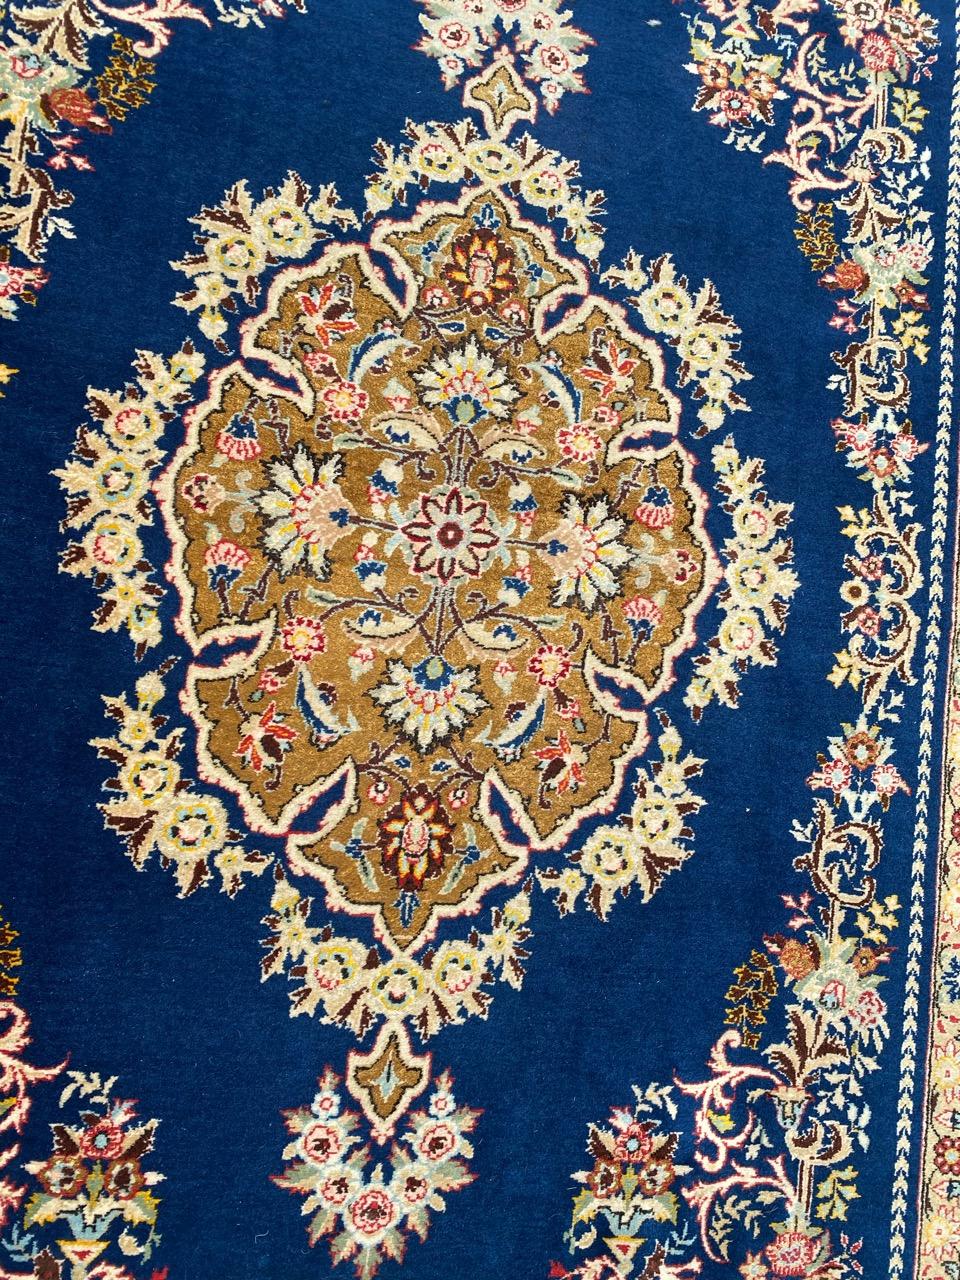 Very beautiful vintage rug with beautiful floral design and nice colors, entirely and finely hand knotted with wool and silk velvet on cotton foundation.